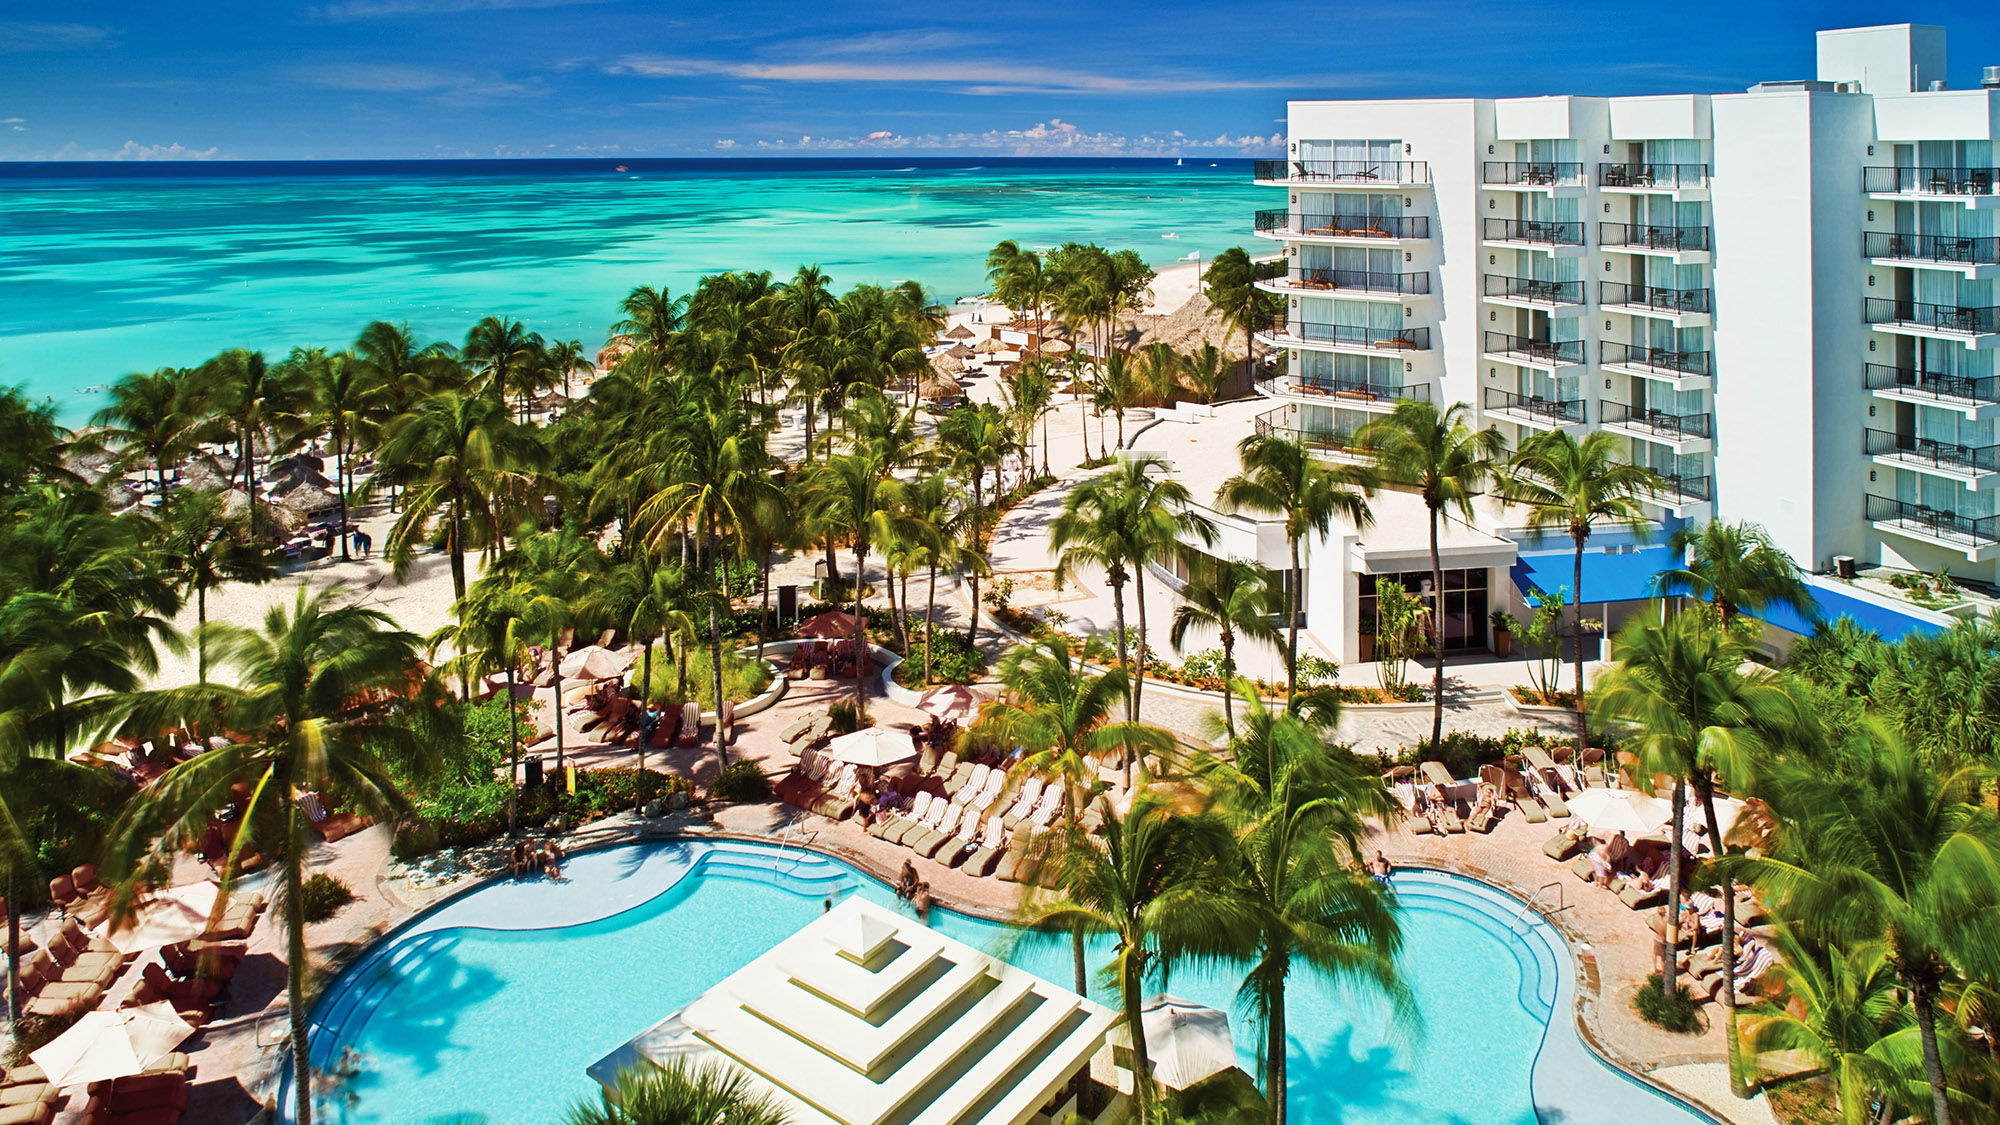 Adults-only experience at Aruba Marriott Resort: Travel Weekly